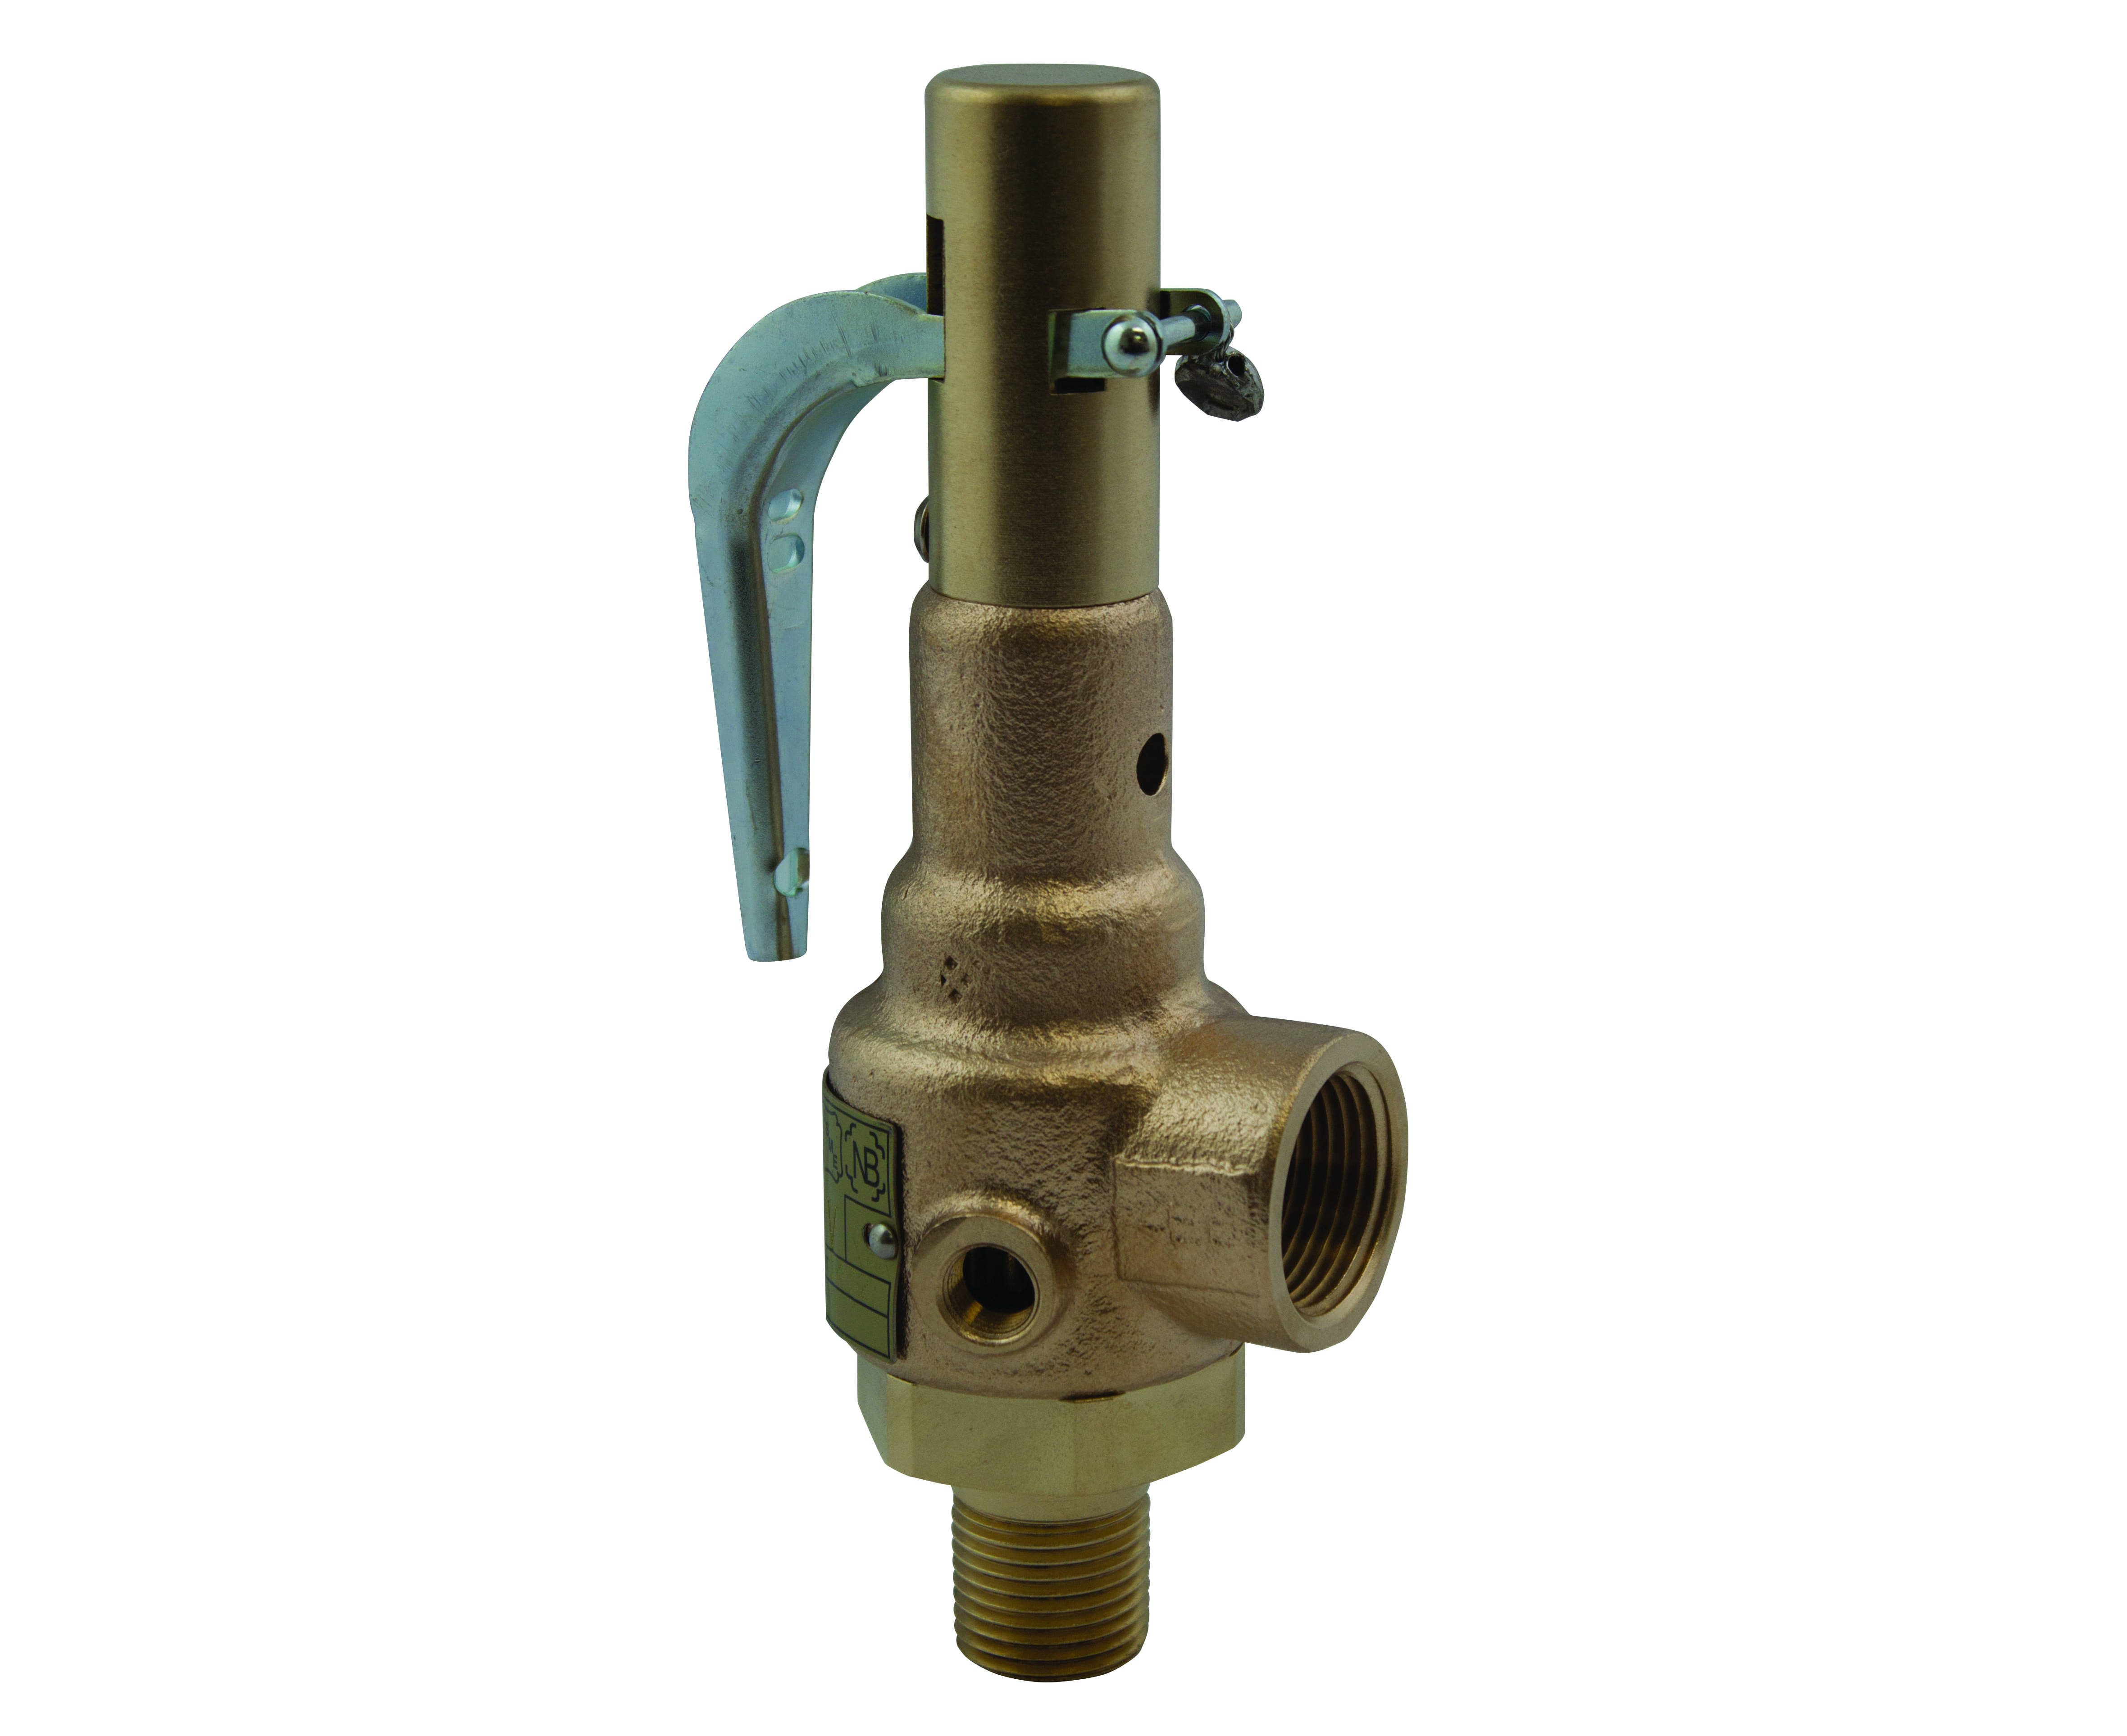 Preview image for Apollo ASME Sec VIII Air Bronze Safety Relief Valves with Brass Trim, Teflon Seat, CE/PED Compliant, 1-1/4" (MNPT x FNPT)